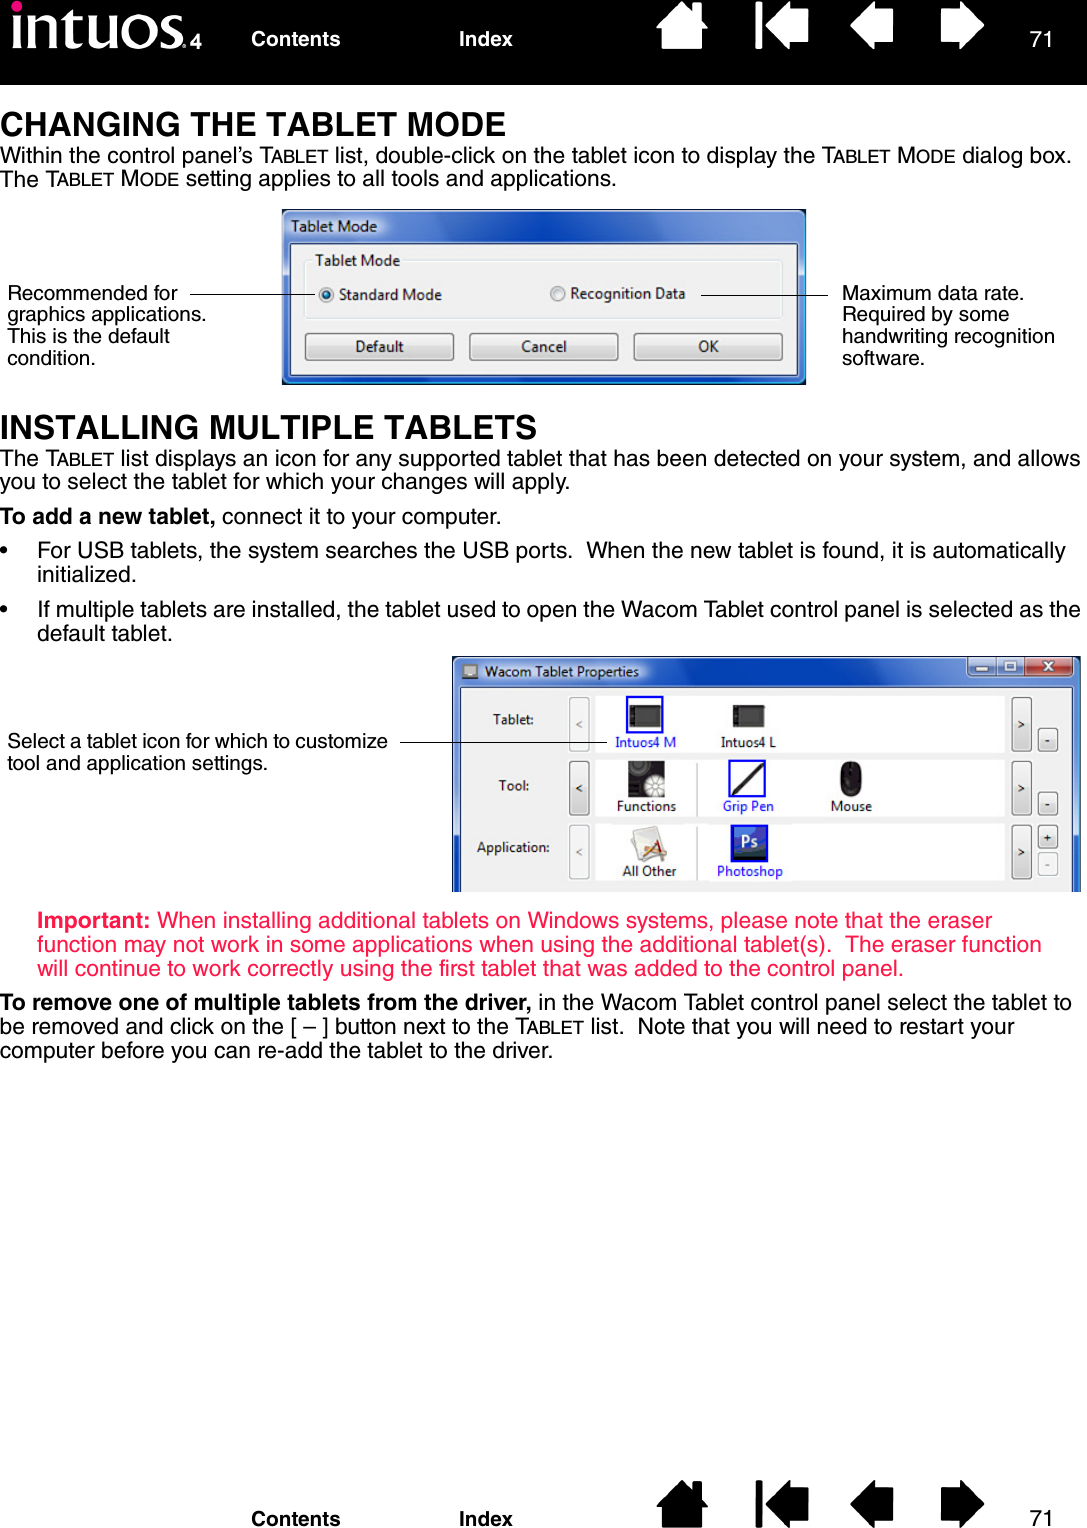 7171IndexContentsIndexContentsCHANGING THE TABLET MODEWithin the control panel’s TABLET list, double-click on the tablet icon to display the TABLET MODE dialog box.  The TABLET MODE setting applies to all tools and applications.INSTALLING MULTIPLE TABLETSThe TABLET list displays an icon for any supported tablet that has been detected on your system, and allows you to select the tablet for which your changes will apply.To add a new tablet, connect it to your computer.• For USB tablets, the system searches the USB ports.  When the new tablet is found, it is automatically initialized.• If multiple tablets are installed, the tablet used to open the Wacom Tablet control panel is selected as the default tablet.Important: When installing additional tablets on Windows systems, please note that the eraser function may not work in some applications when using the additional tablet(s).  The eraser function will continue to work correctly using the first tablet that was added to the control panel.To remove one of multiple tablets from the driver, in the Wacom Tablet control panel select the tablet to be removed and click on the [ – ] button next to the TABLET list.  Note that you will need to restart your computer before you can re-add the tablet to the driver.Recommended for graphics applications. This is the default condition.Maximum data rate.  Required by some handwriting recognition software.Select a tablet icon for which to customize tool and application settings.